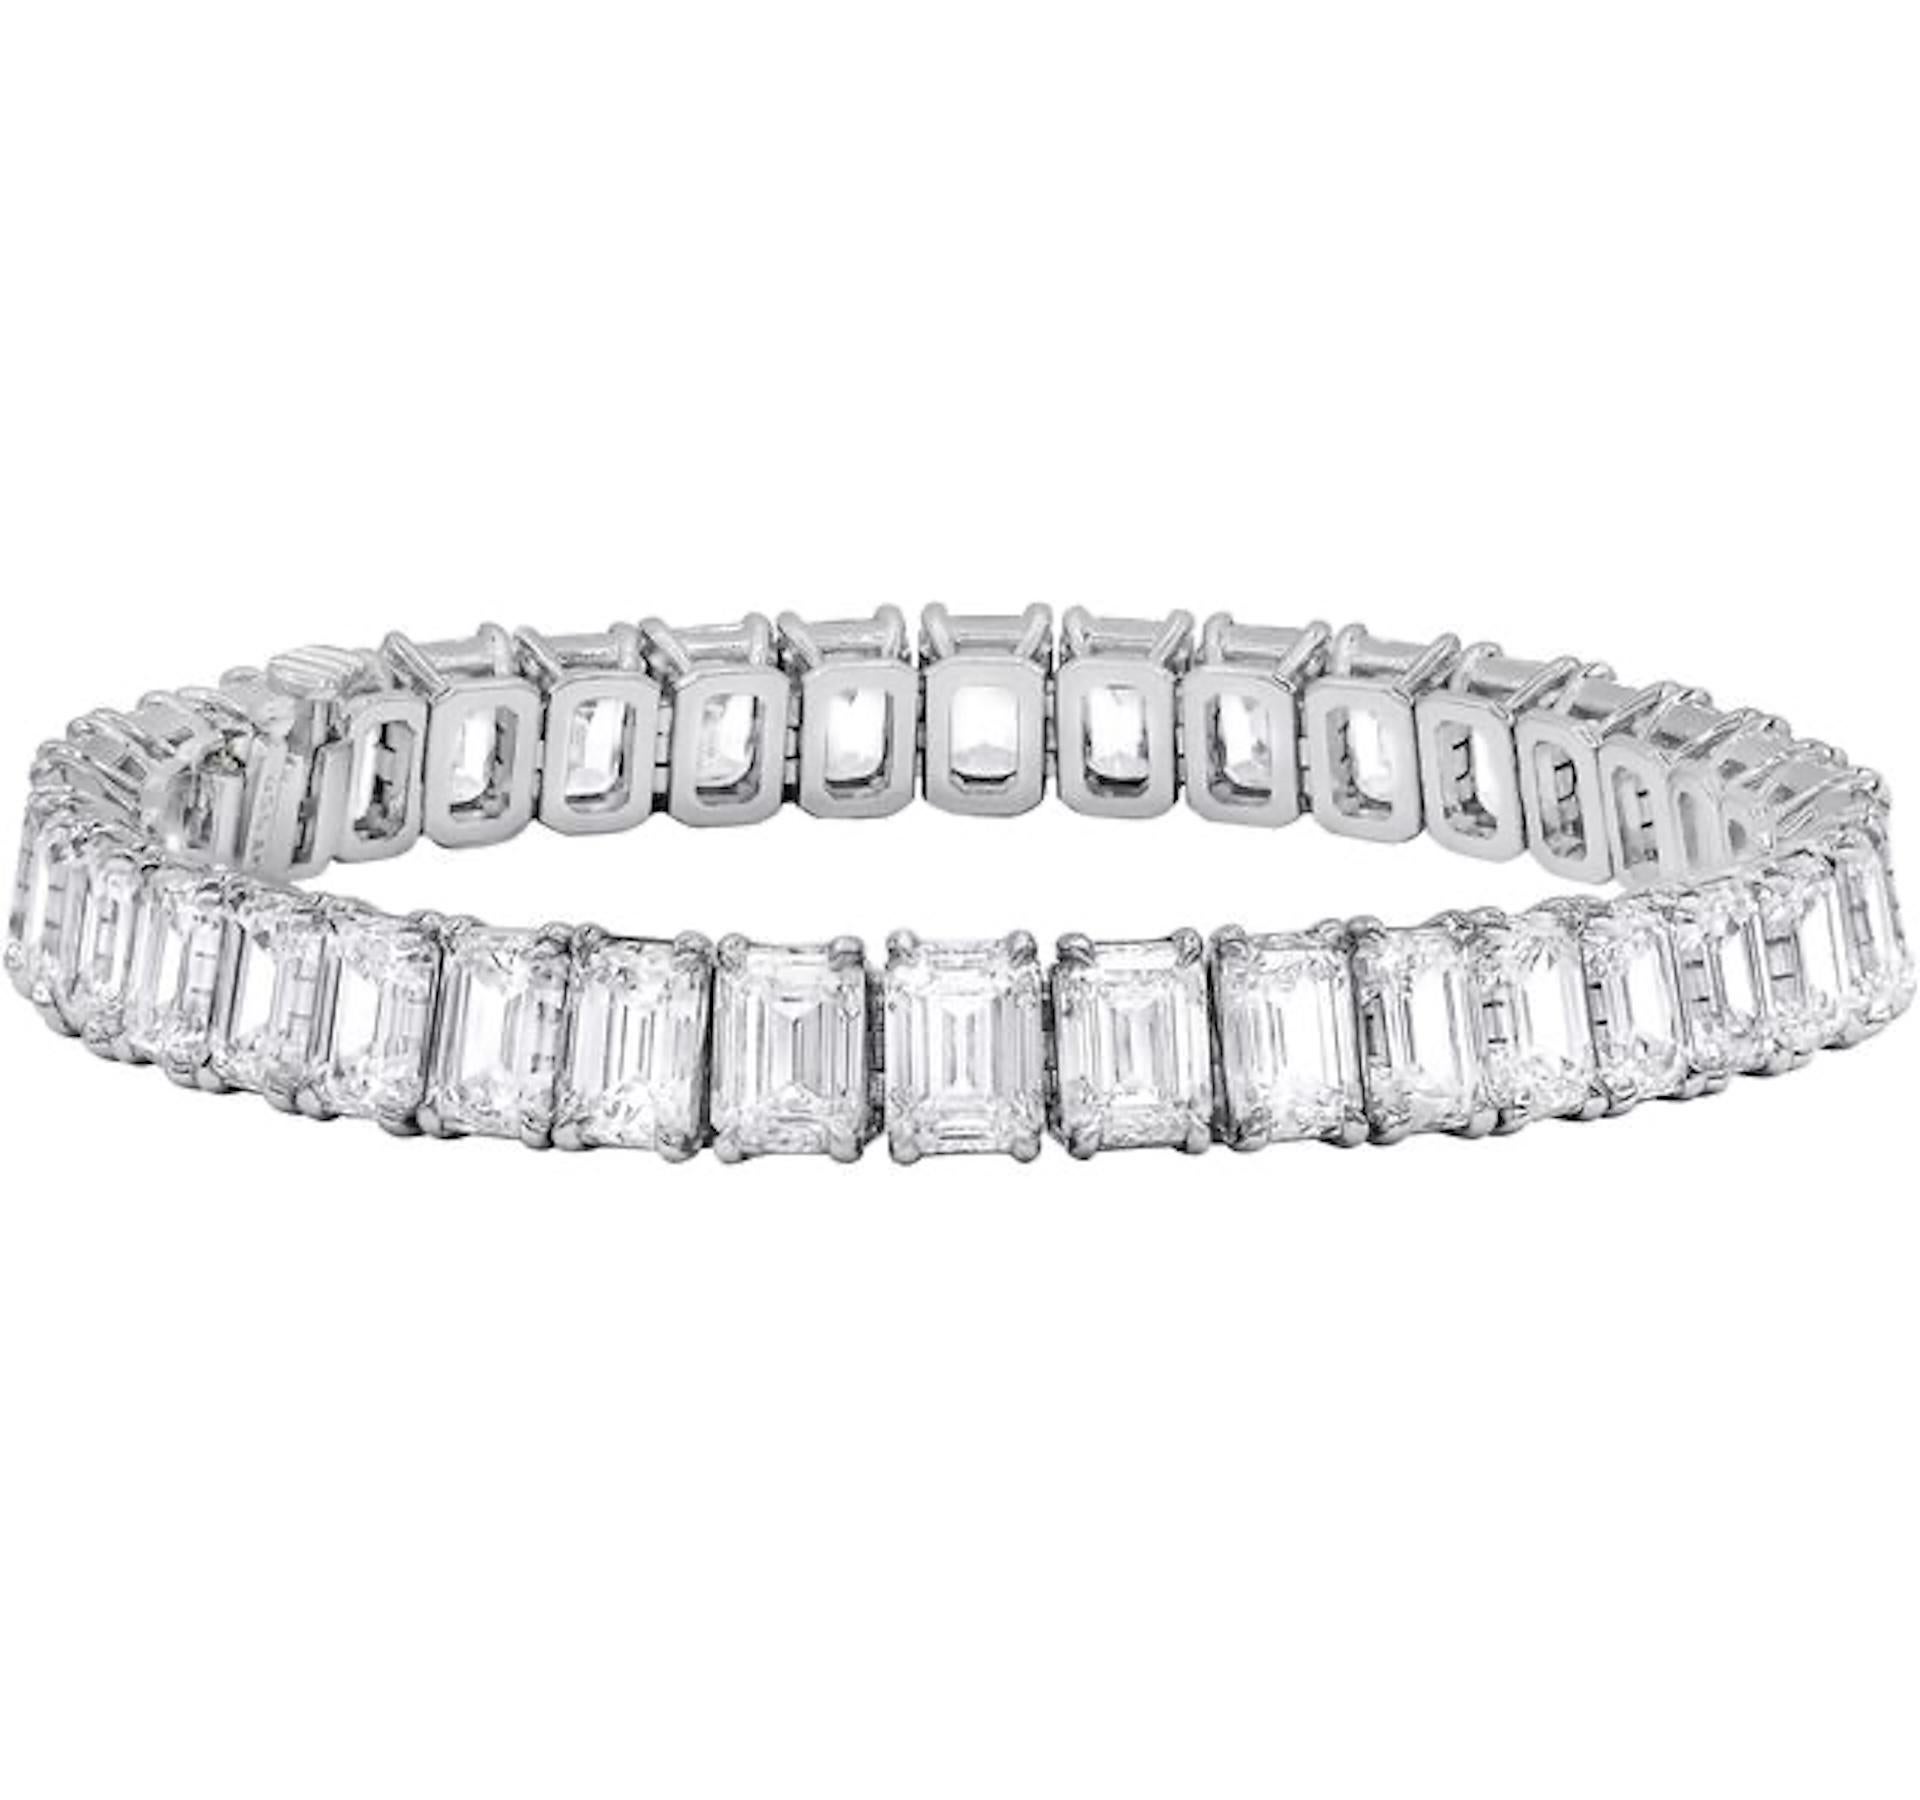 Diana M. 26.97 Carat 4 Prong Emerald Cut Diamond Bracelet  In New Condition For Sale In New York, NY